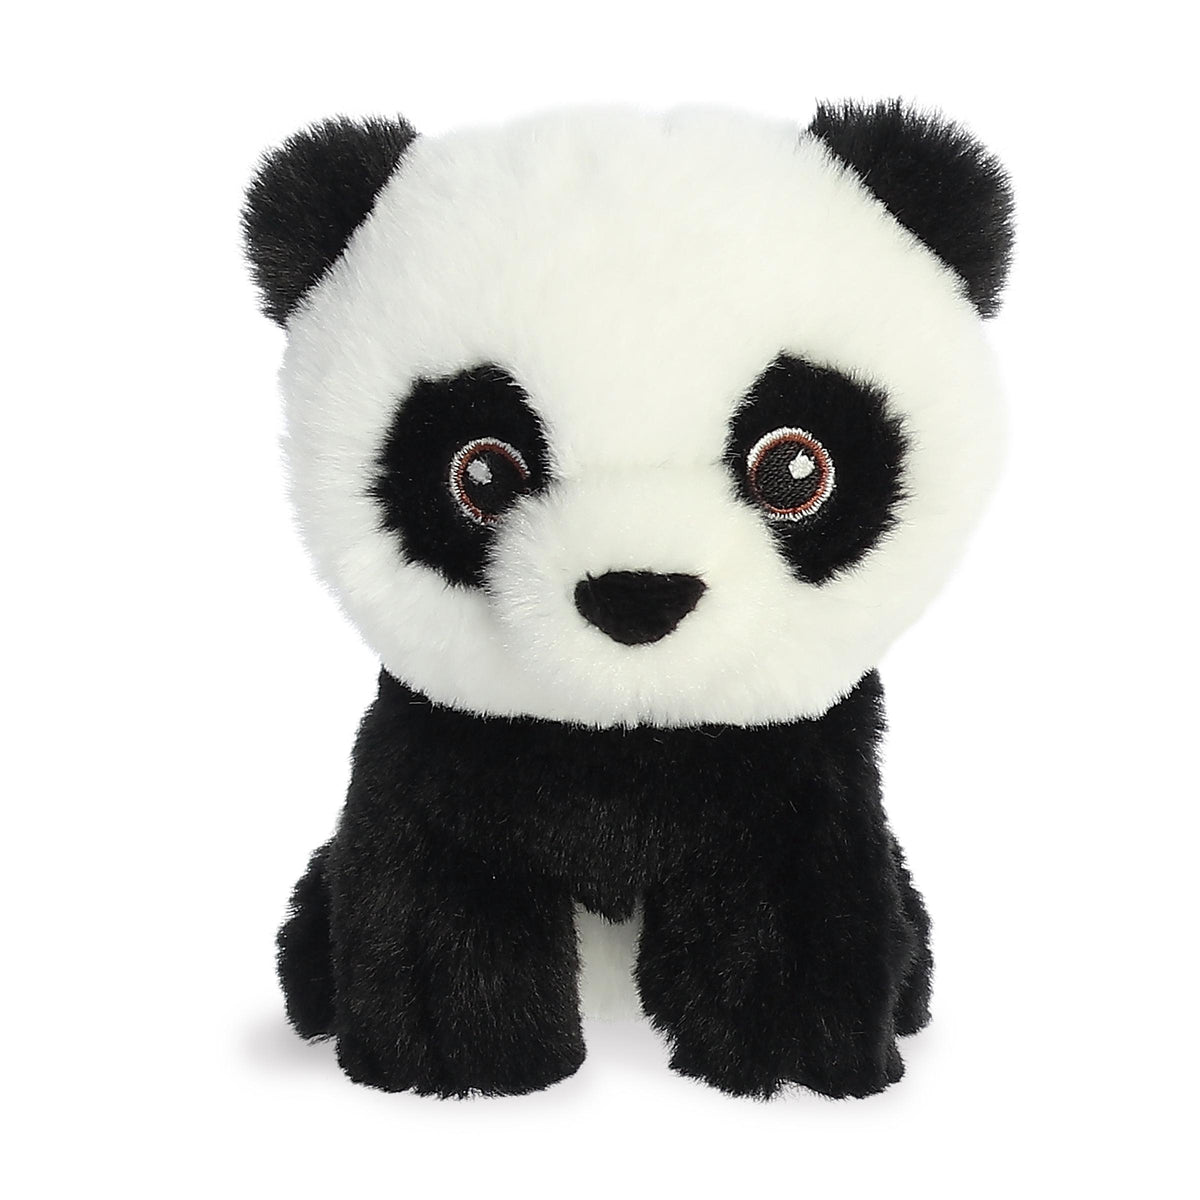 Precious mini panda plush with the traditional black and white coat, wonderfully embroidered eyes, and an eco-nation tag